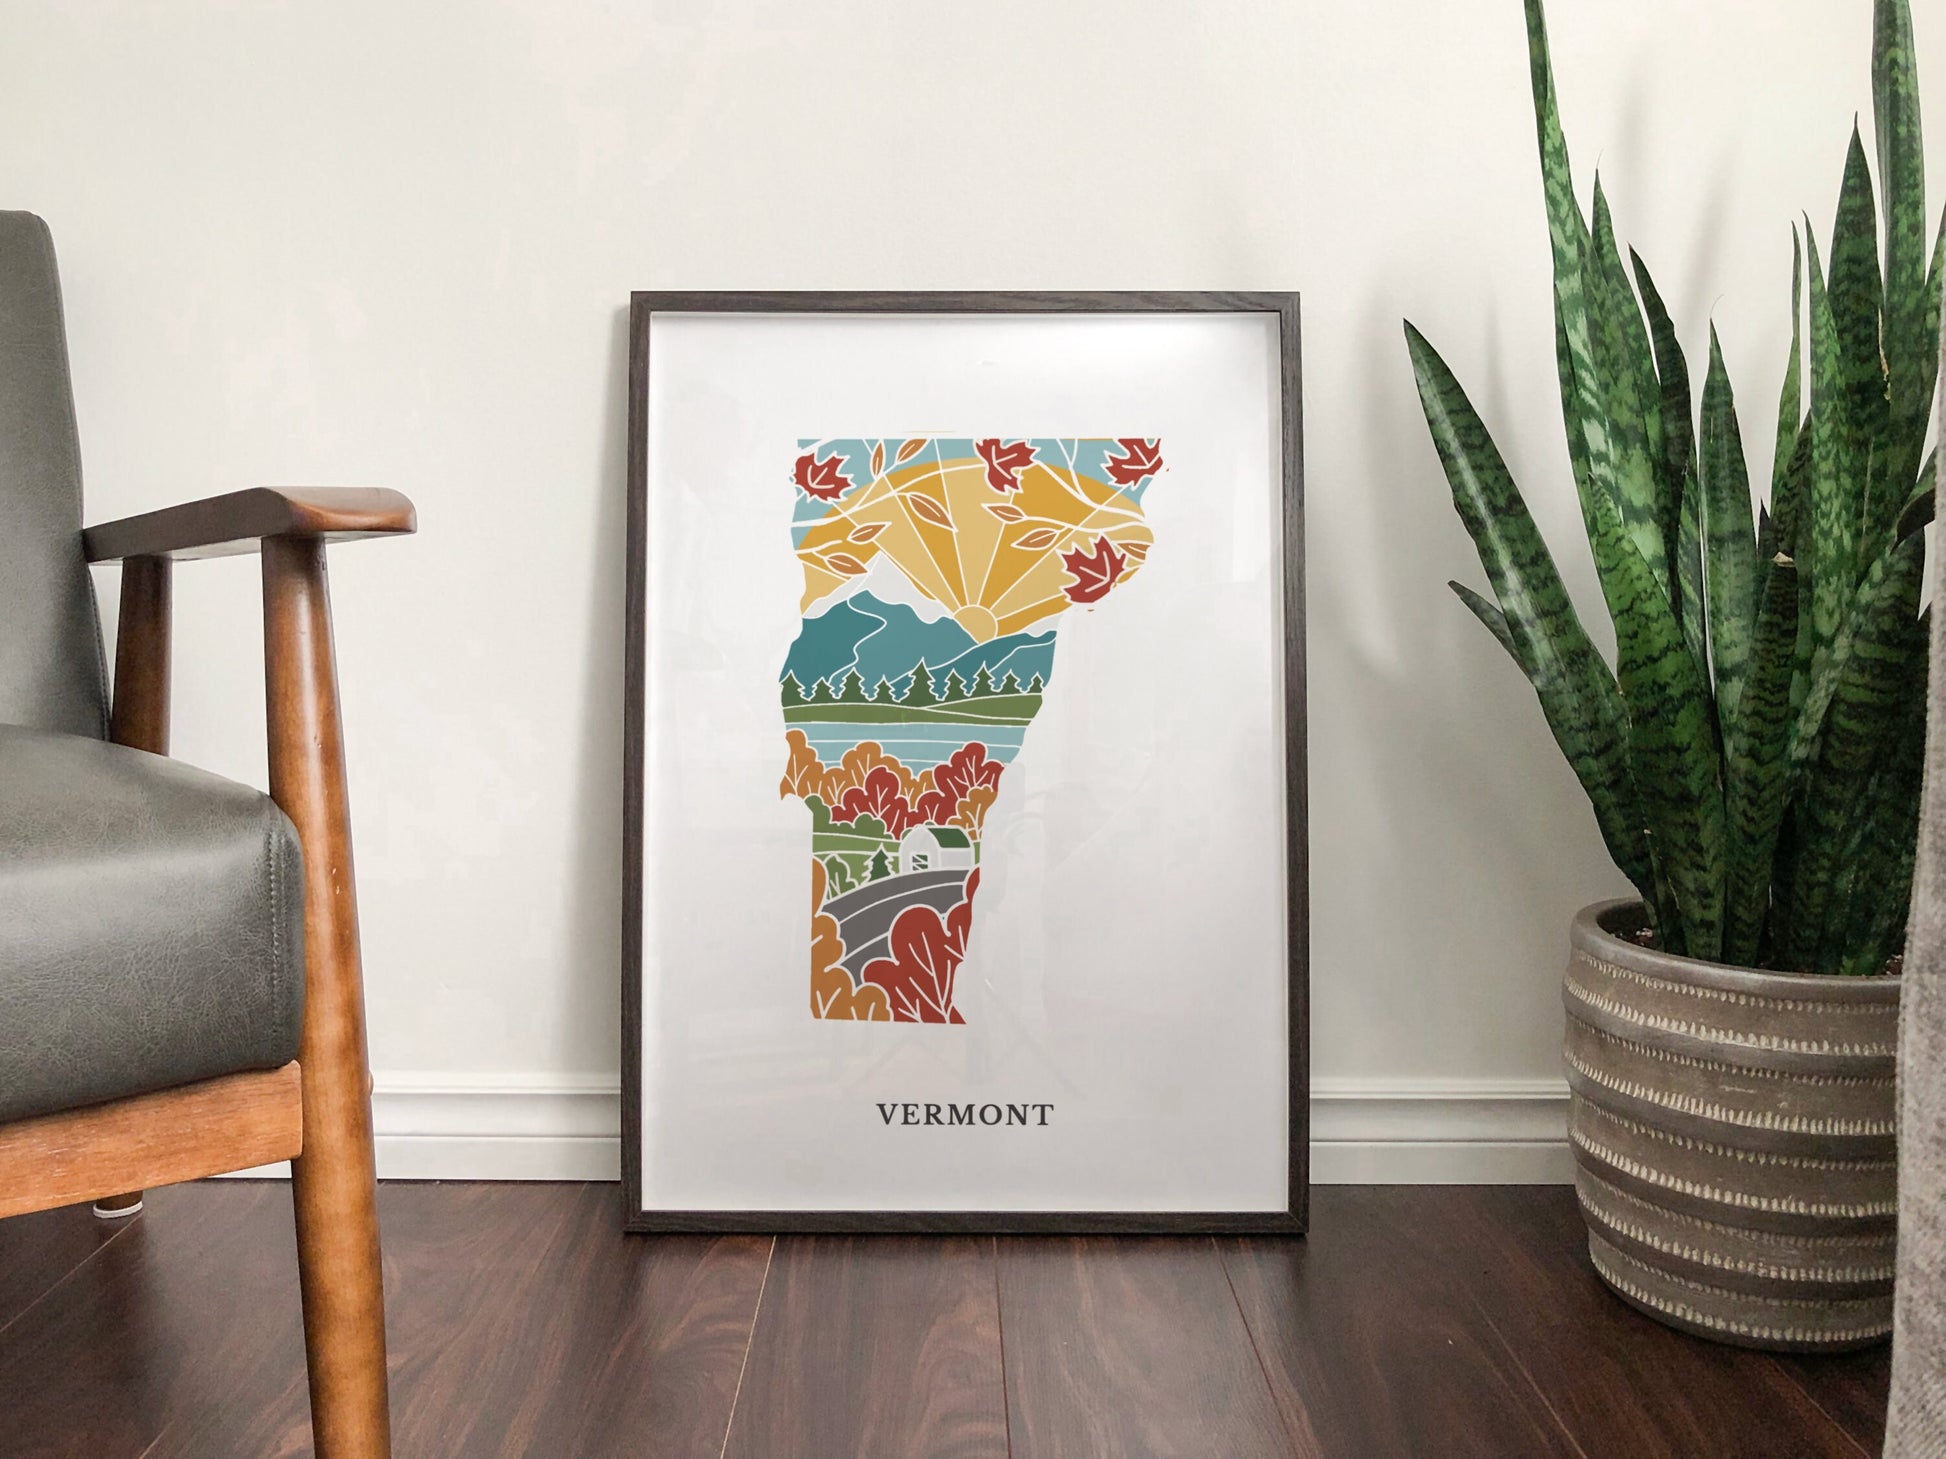 Vermont Physical Art Print | State Wall Art | 5x7, 8x10, 11x14, 16x20 Archival Art Print | Vermont Illustrated Poster